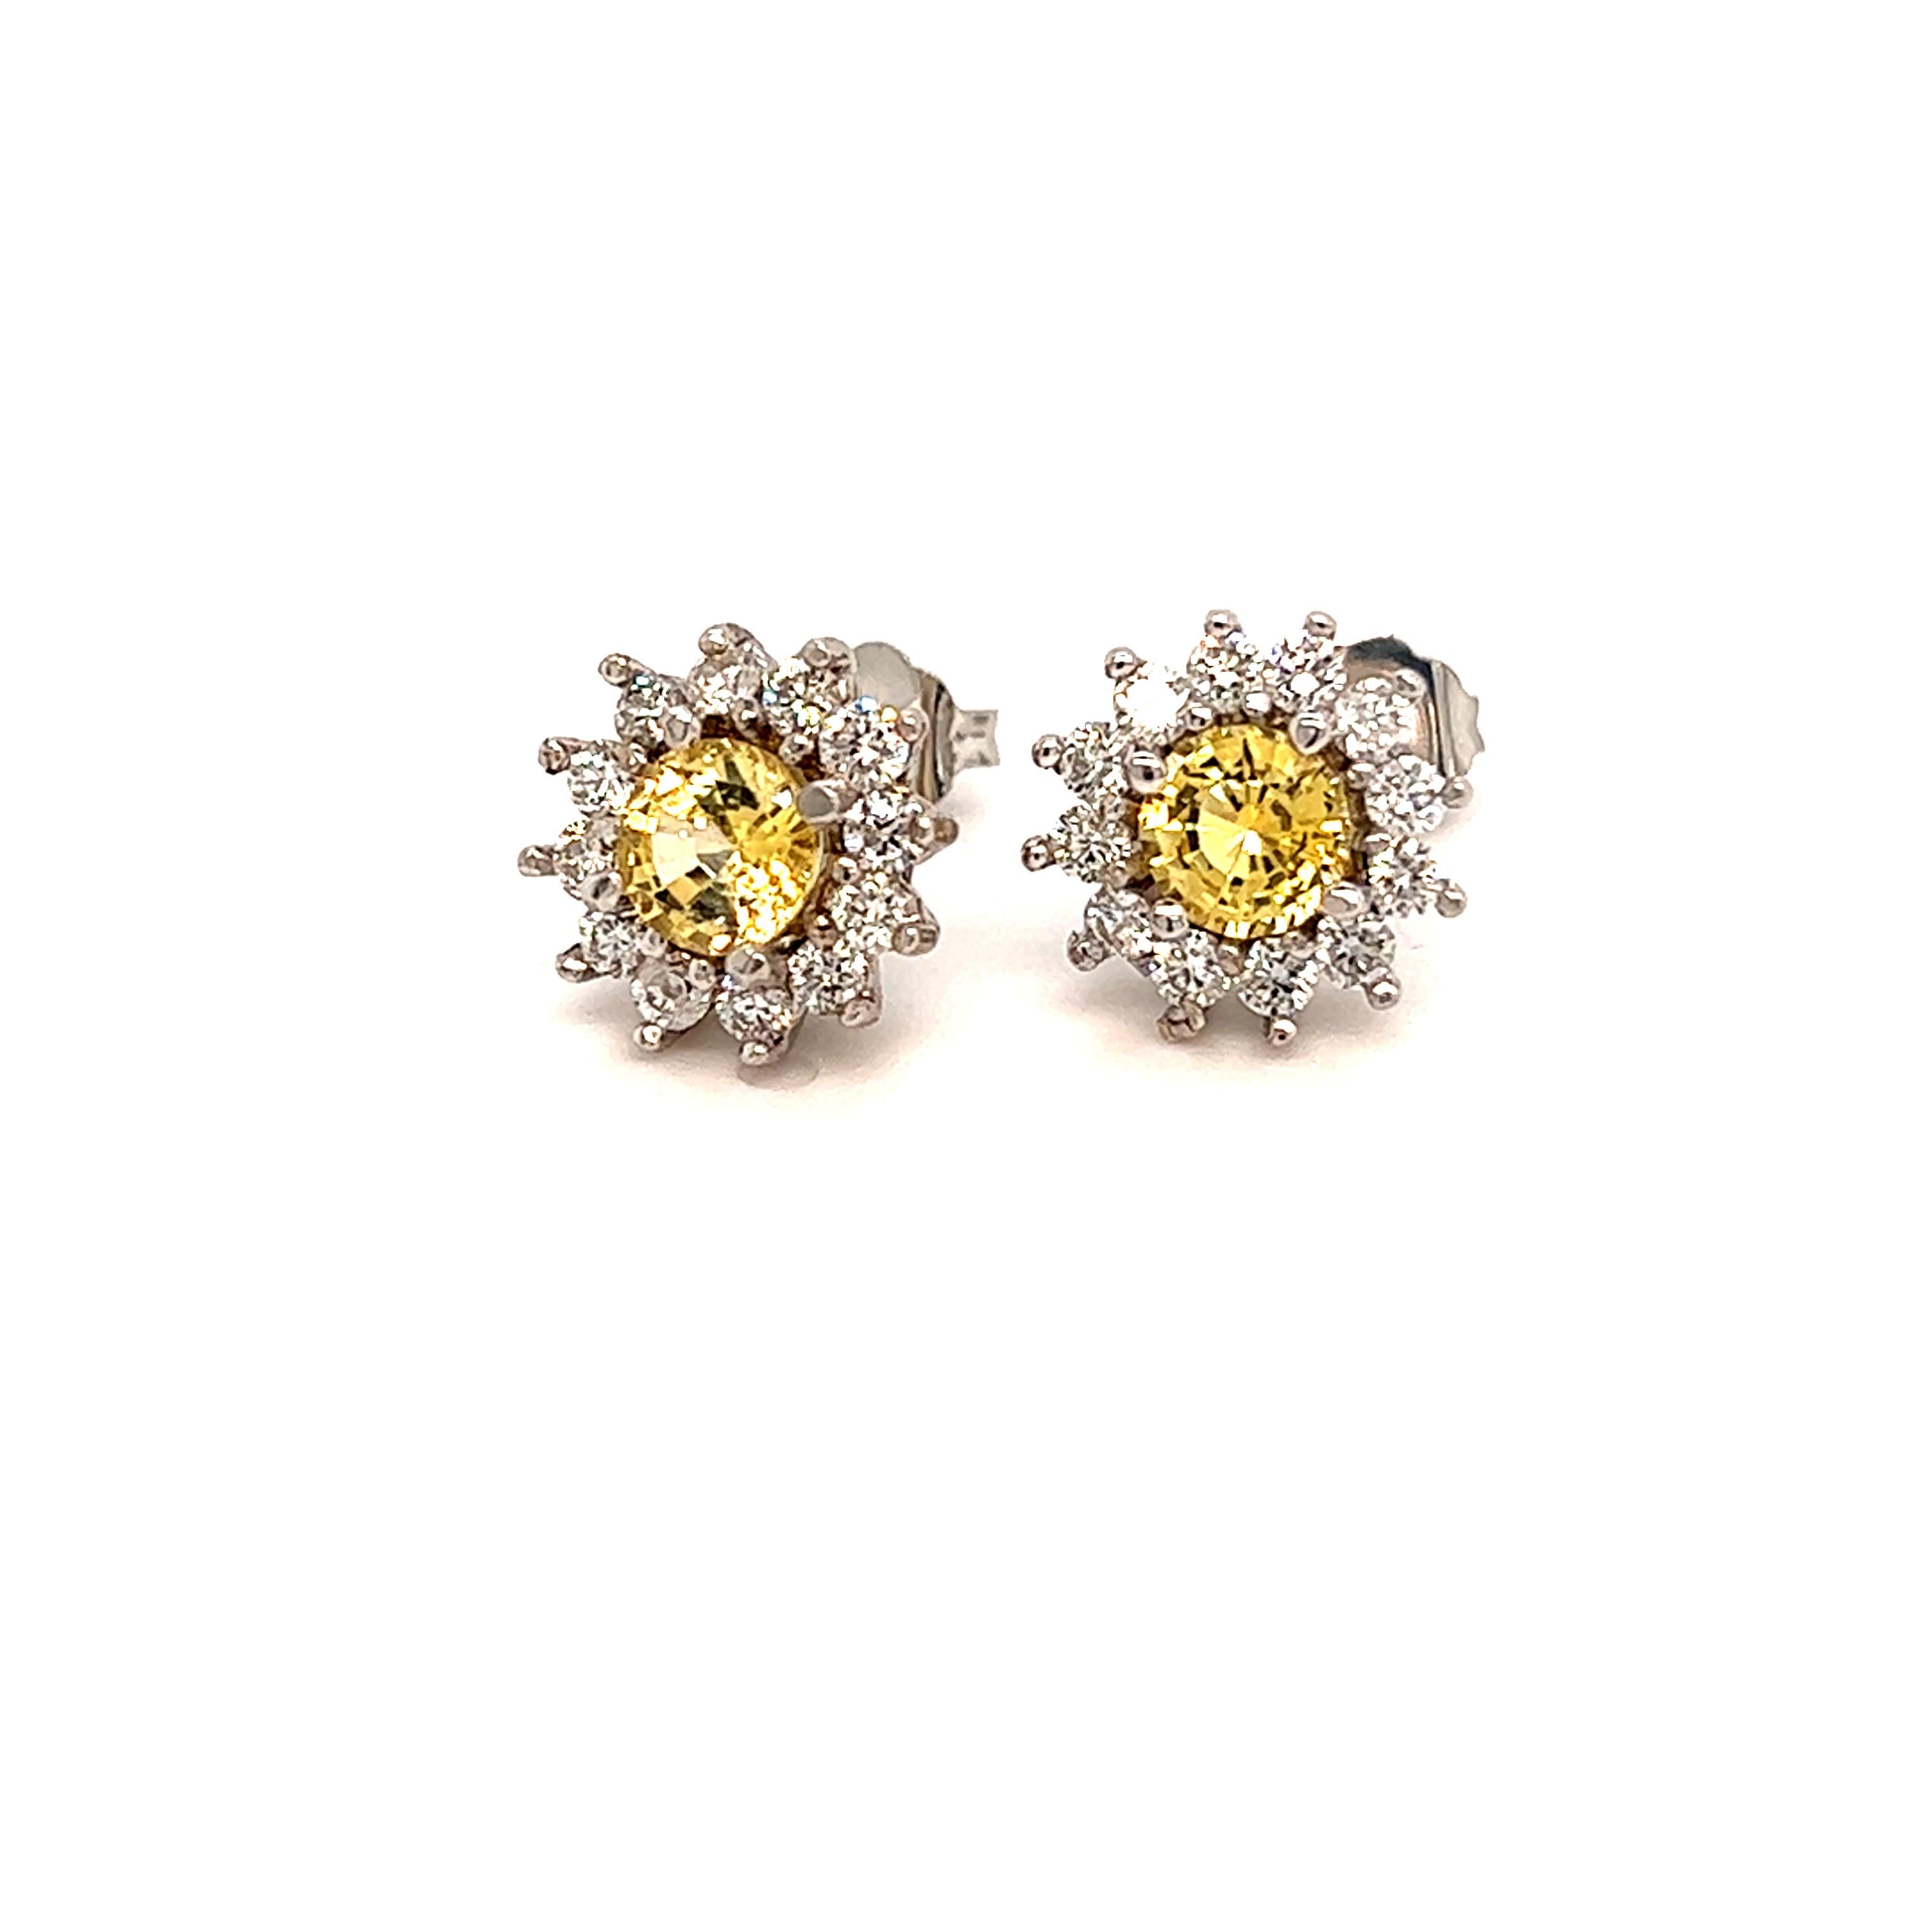 Natural Sapphire Diamond Stud Earrings 14k Gold 2.91 TCW Certified $4,950 121264

Nothing says, “I Love you” more than Diamonds and Pearls!

These Sapphire earrings have been Certified, Inspected, and Appraised by Gemological Appraisal